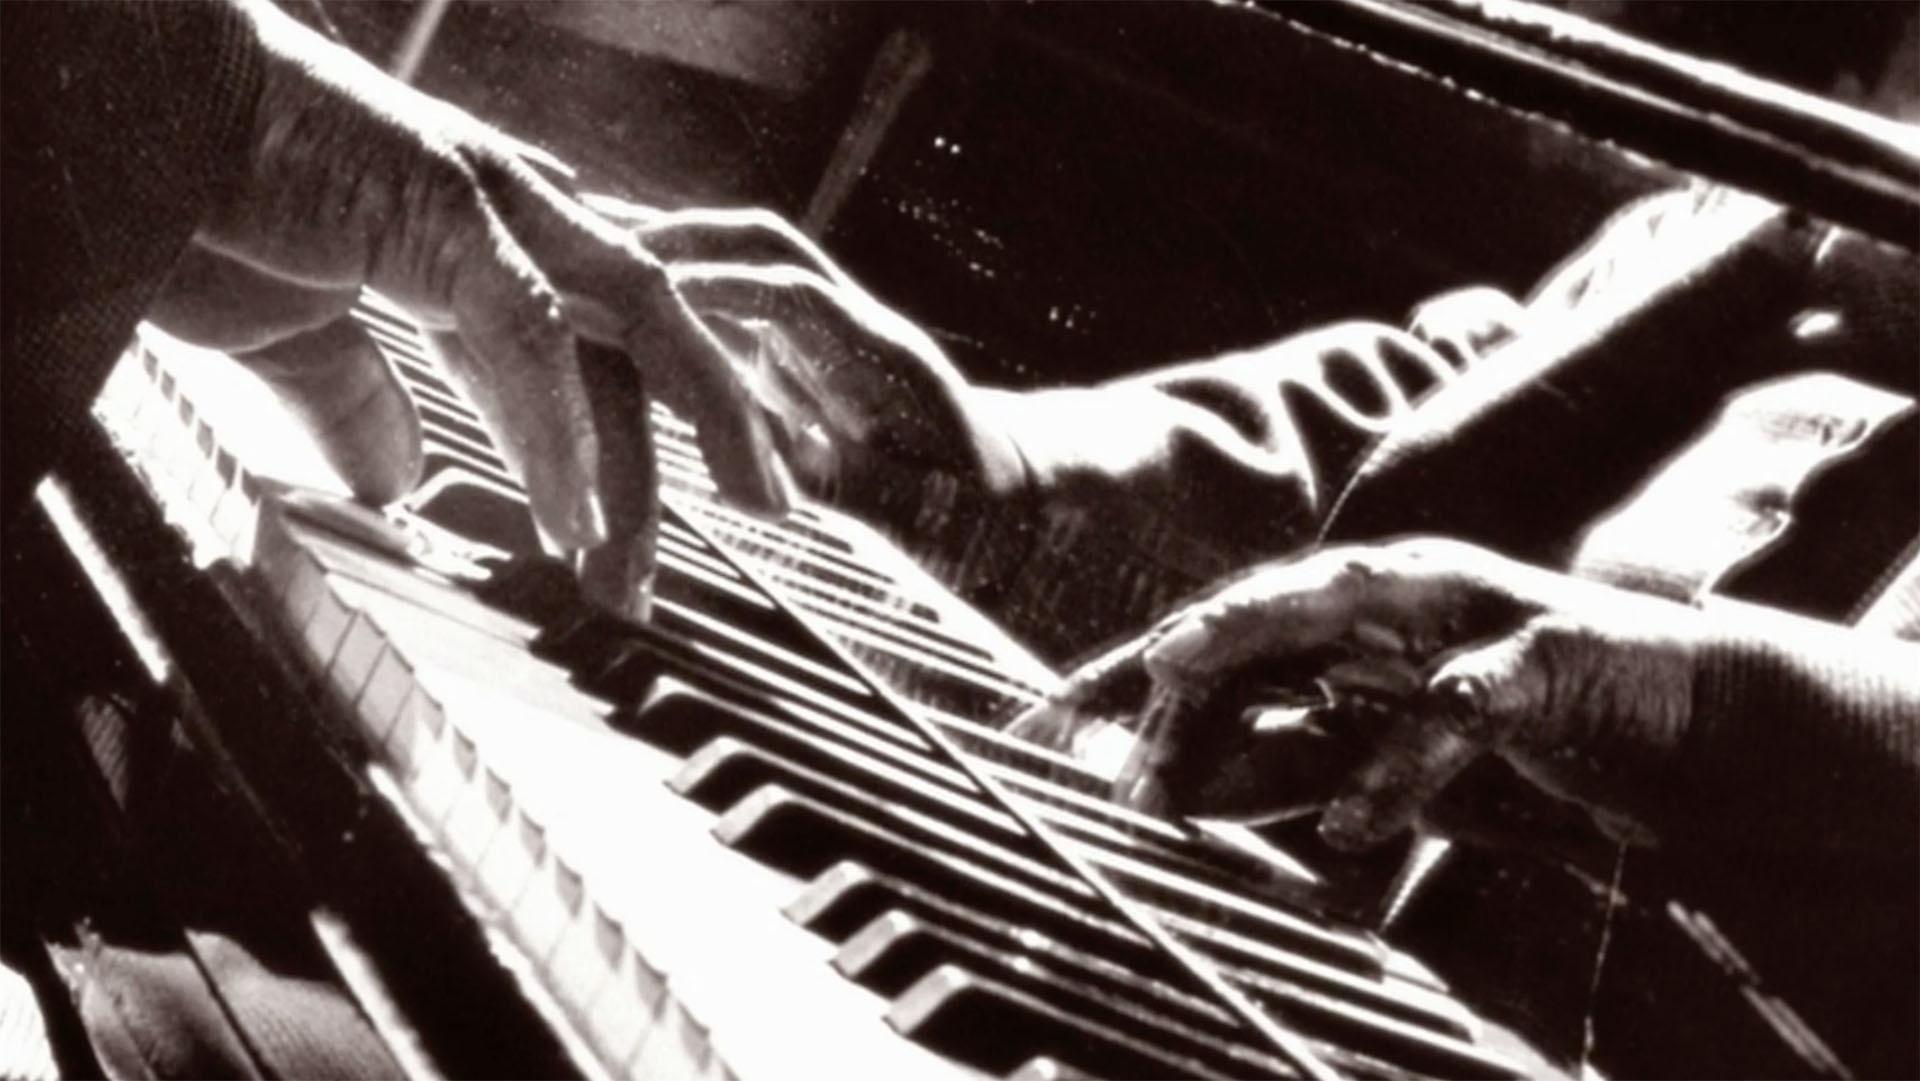 A black-and-white image of someone's fingers on piano keys.